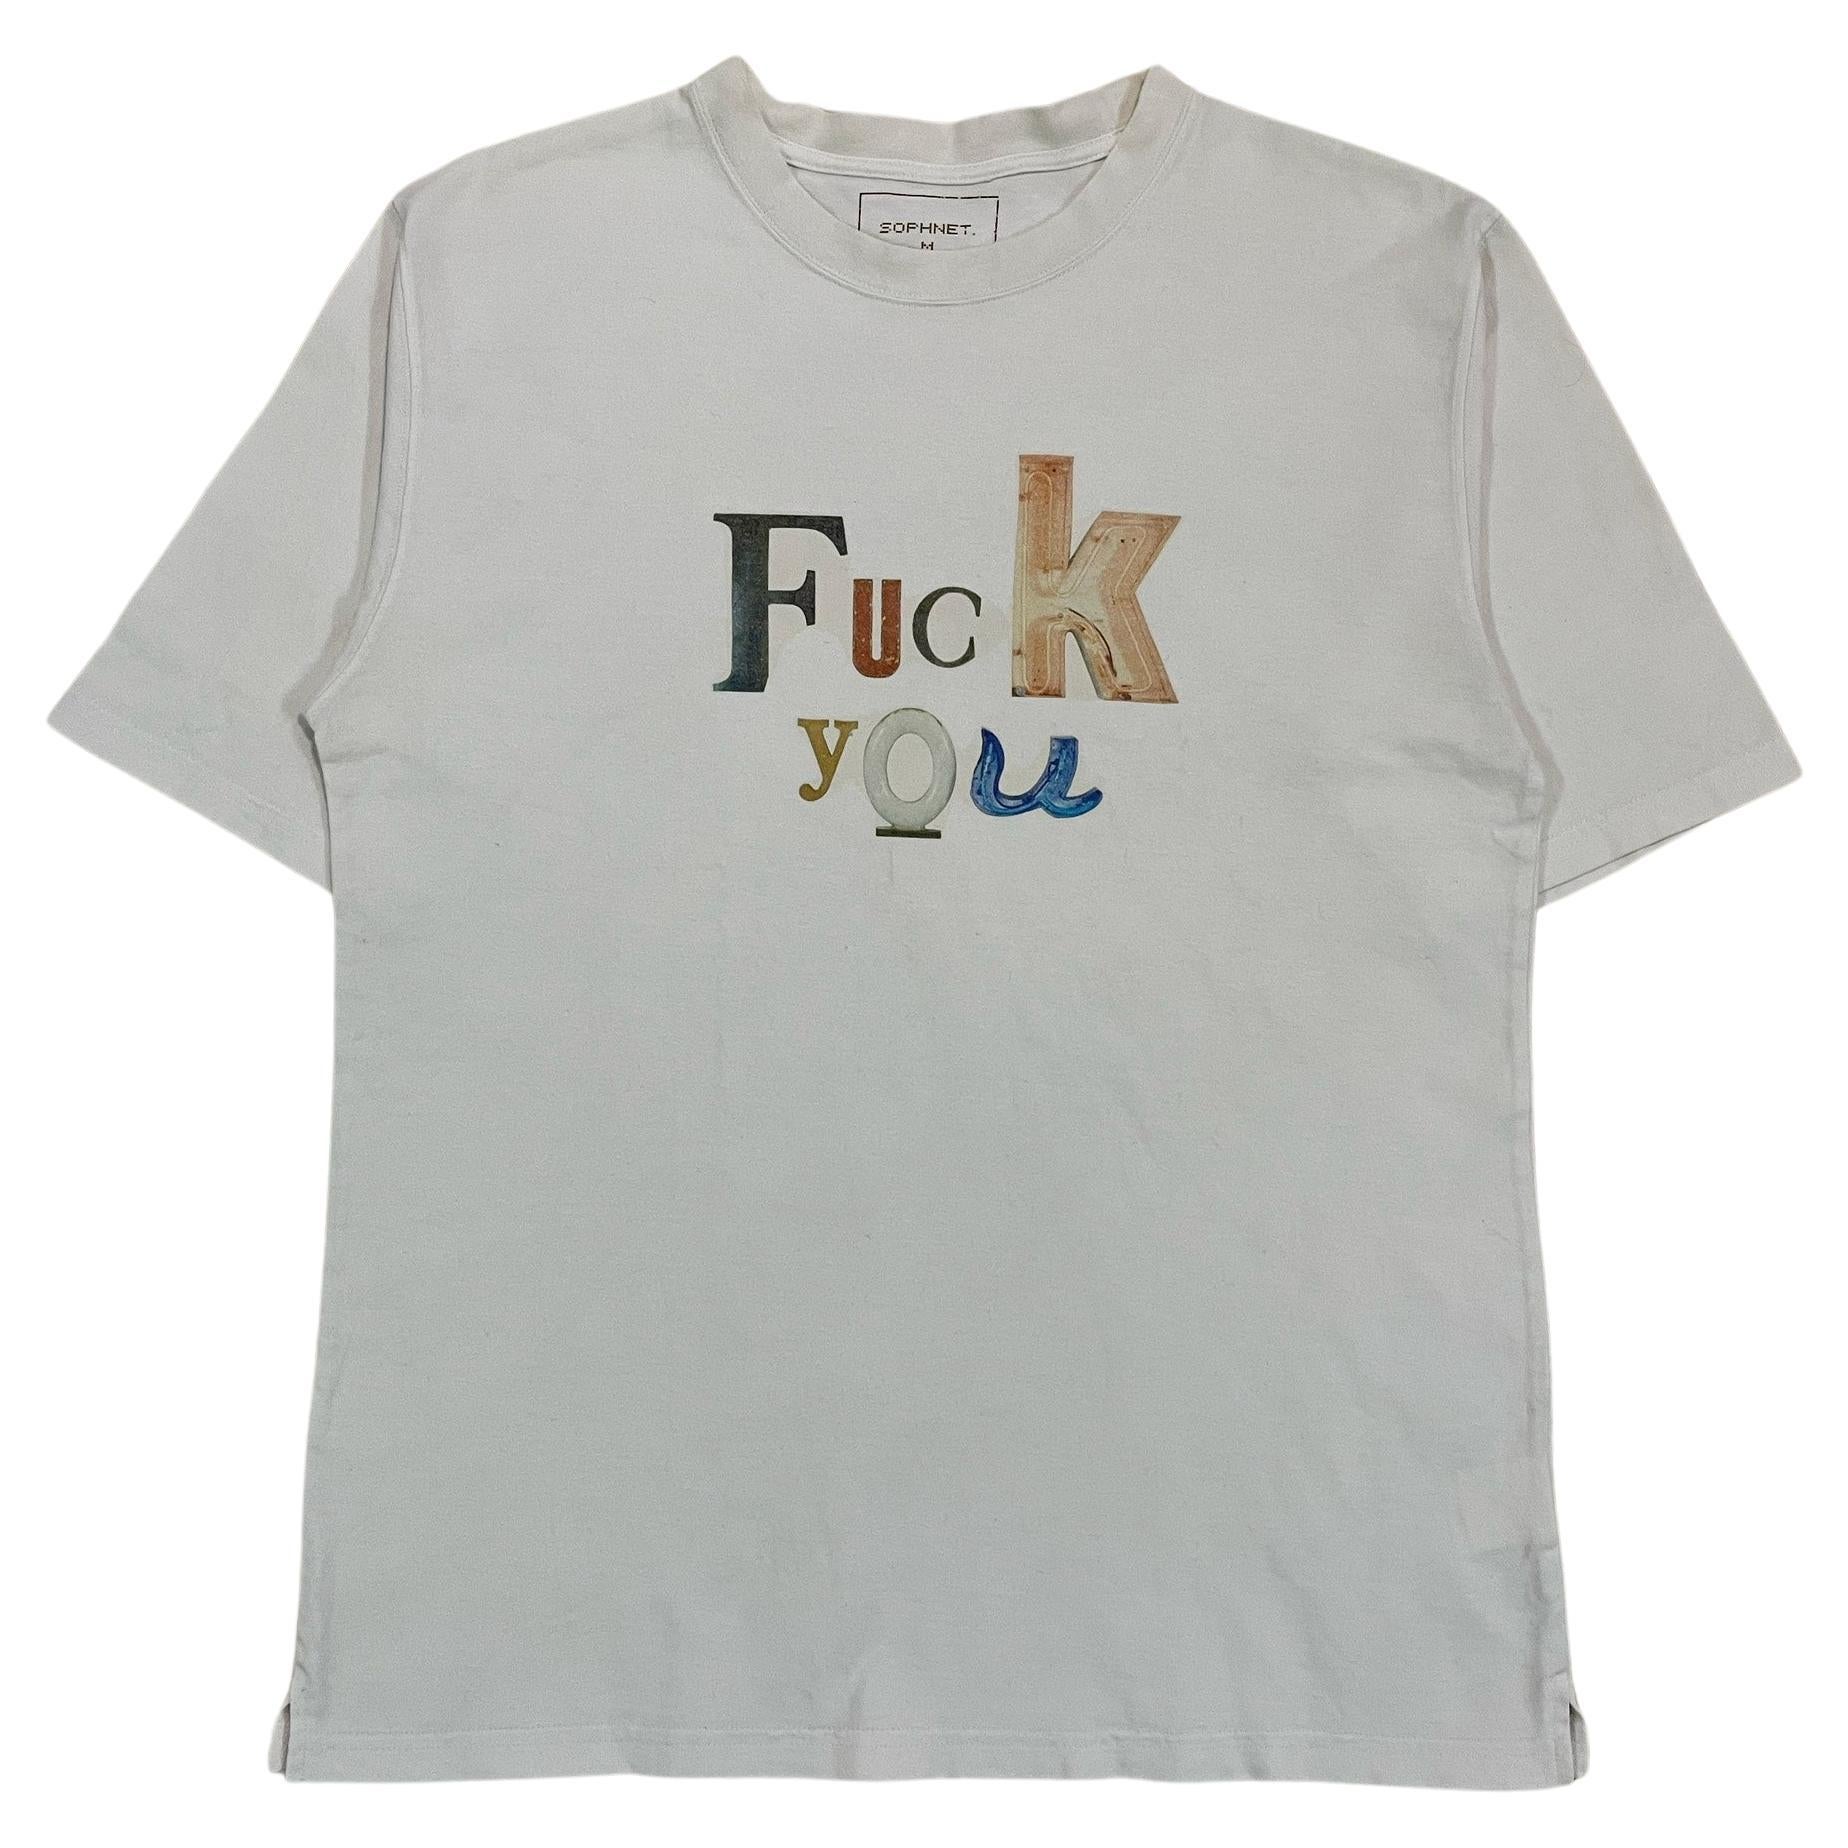 Sophnet S/S2016 "F*** You" T-Shirt For Sale